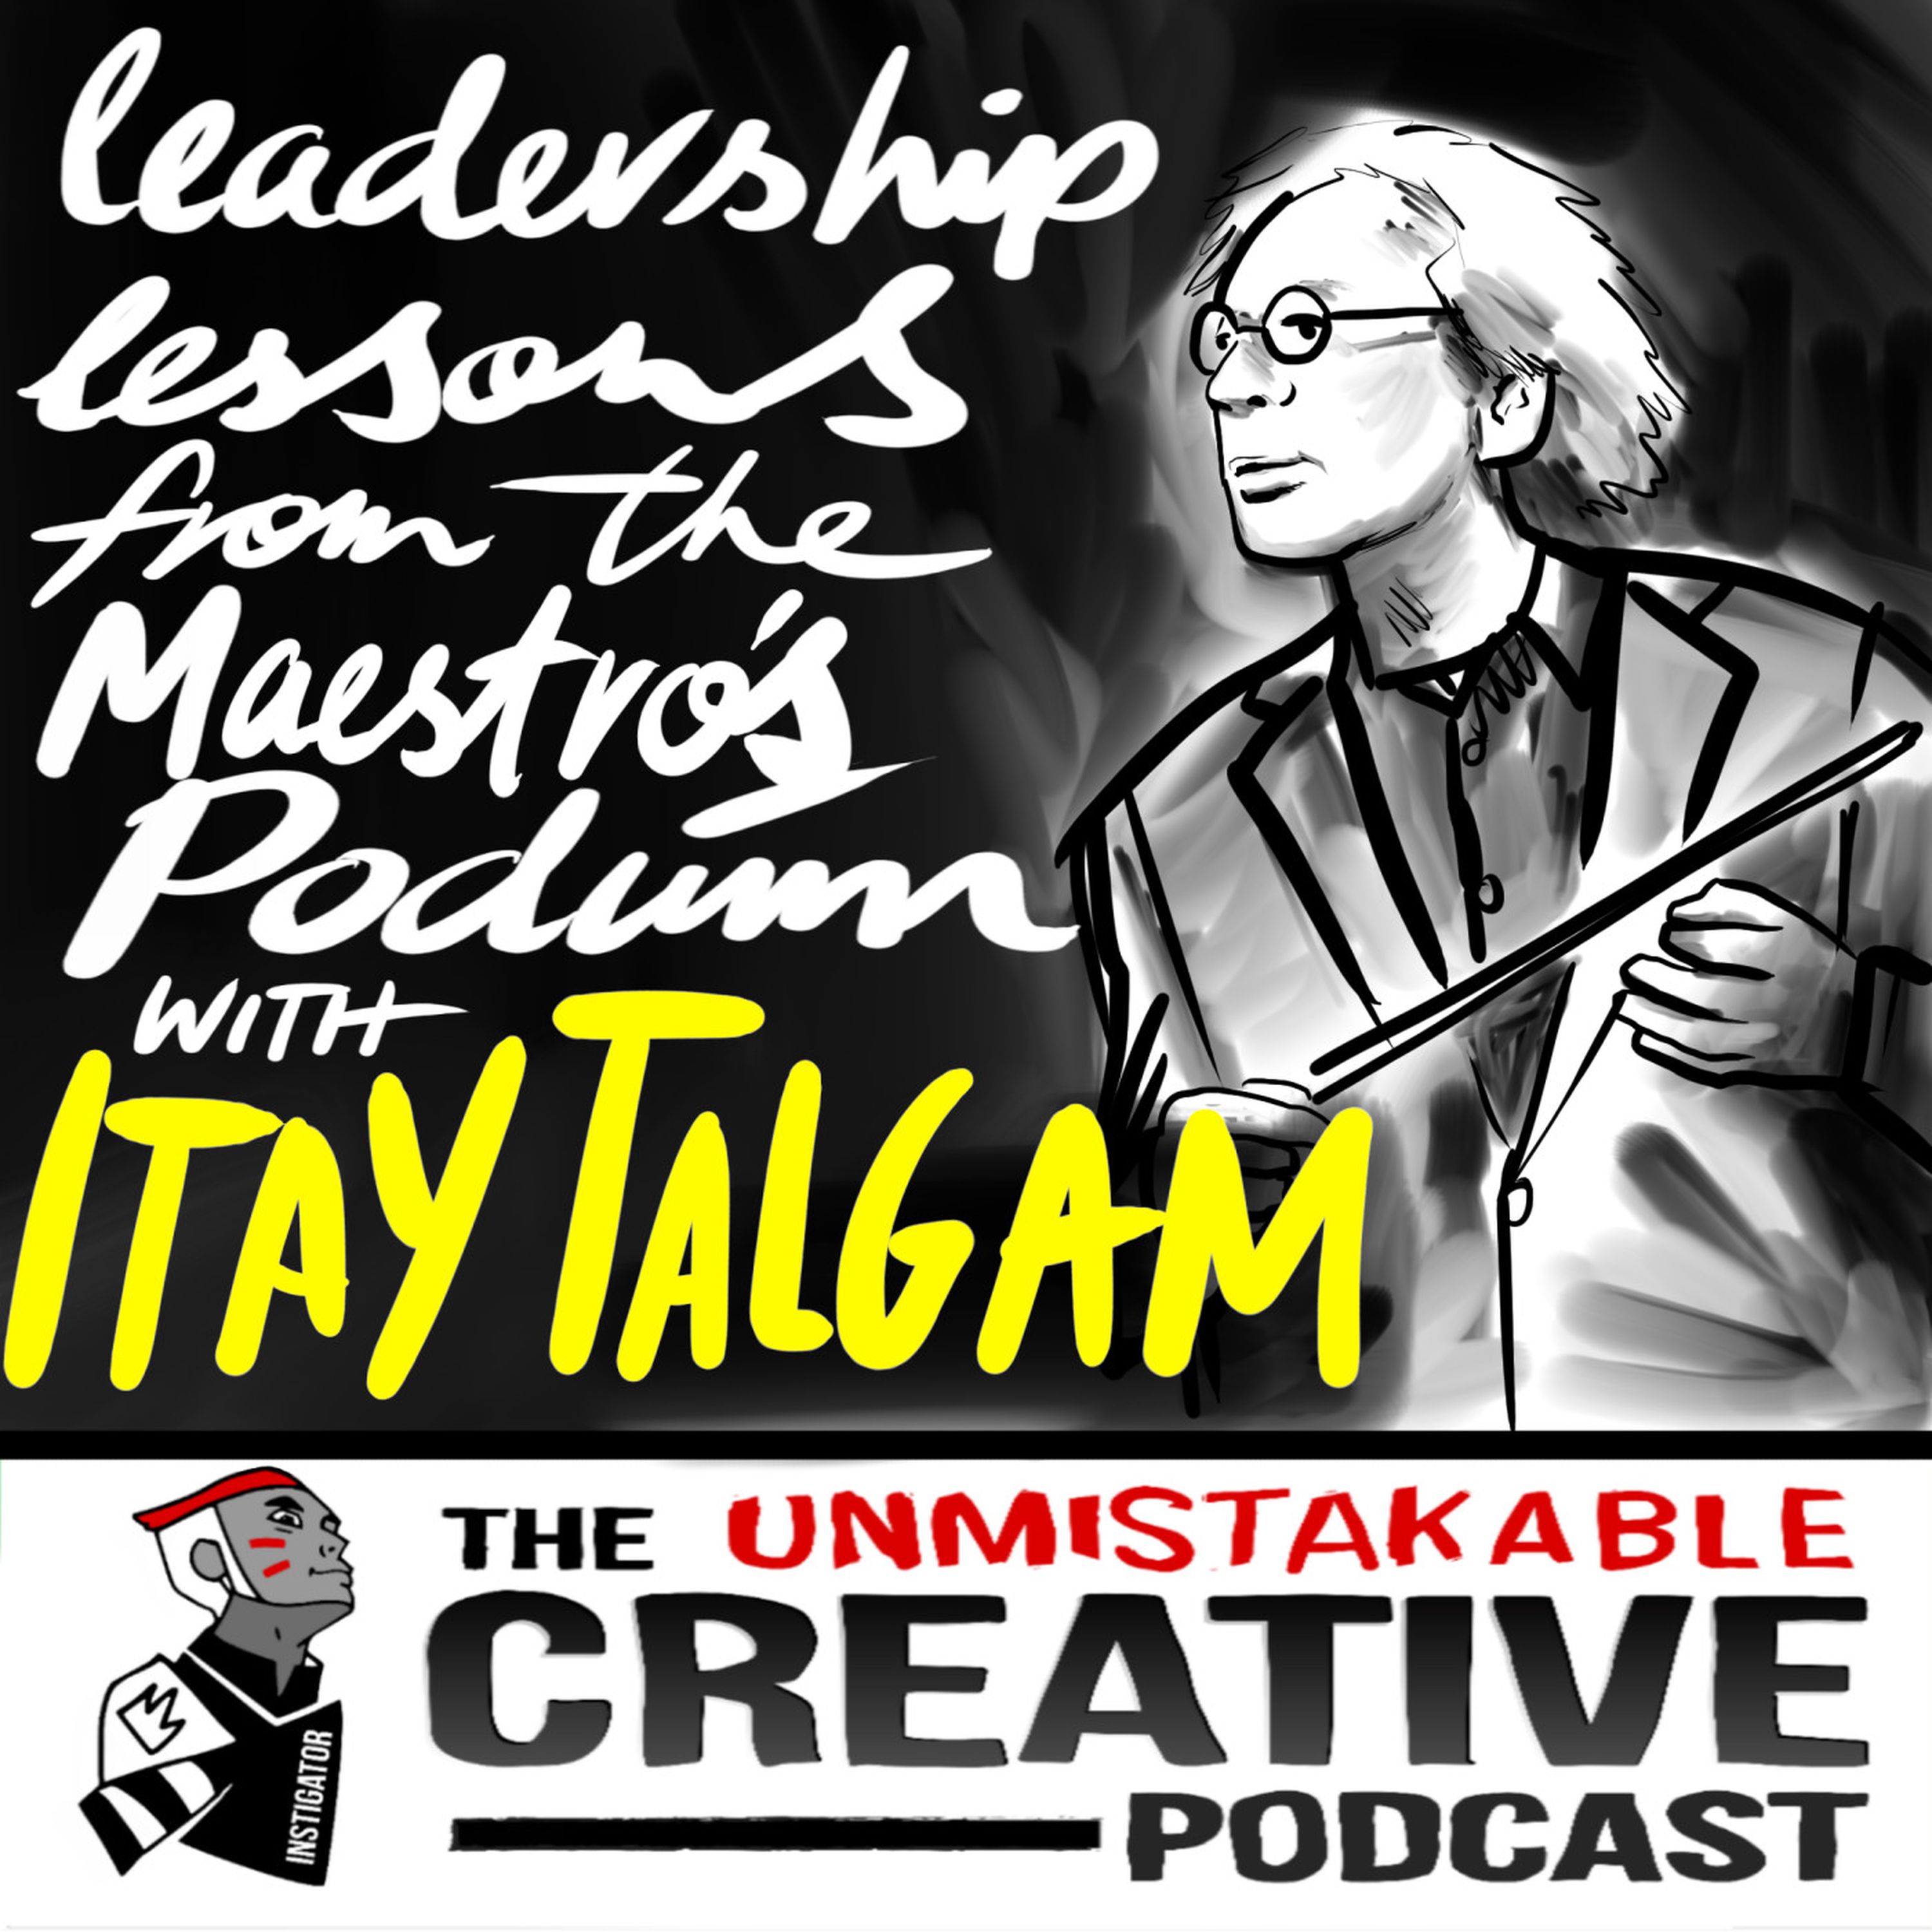 Leadership Lessons From the Maestro’s Podium with Itay Talgam